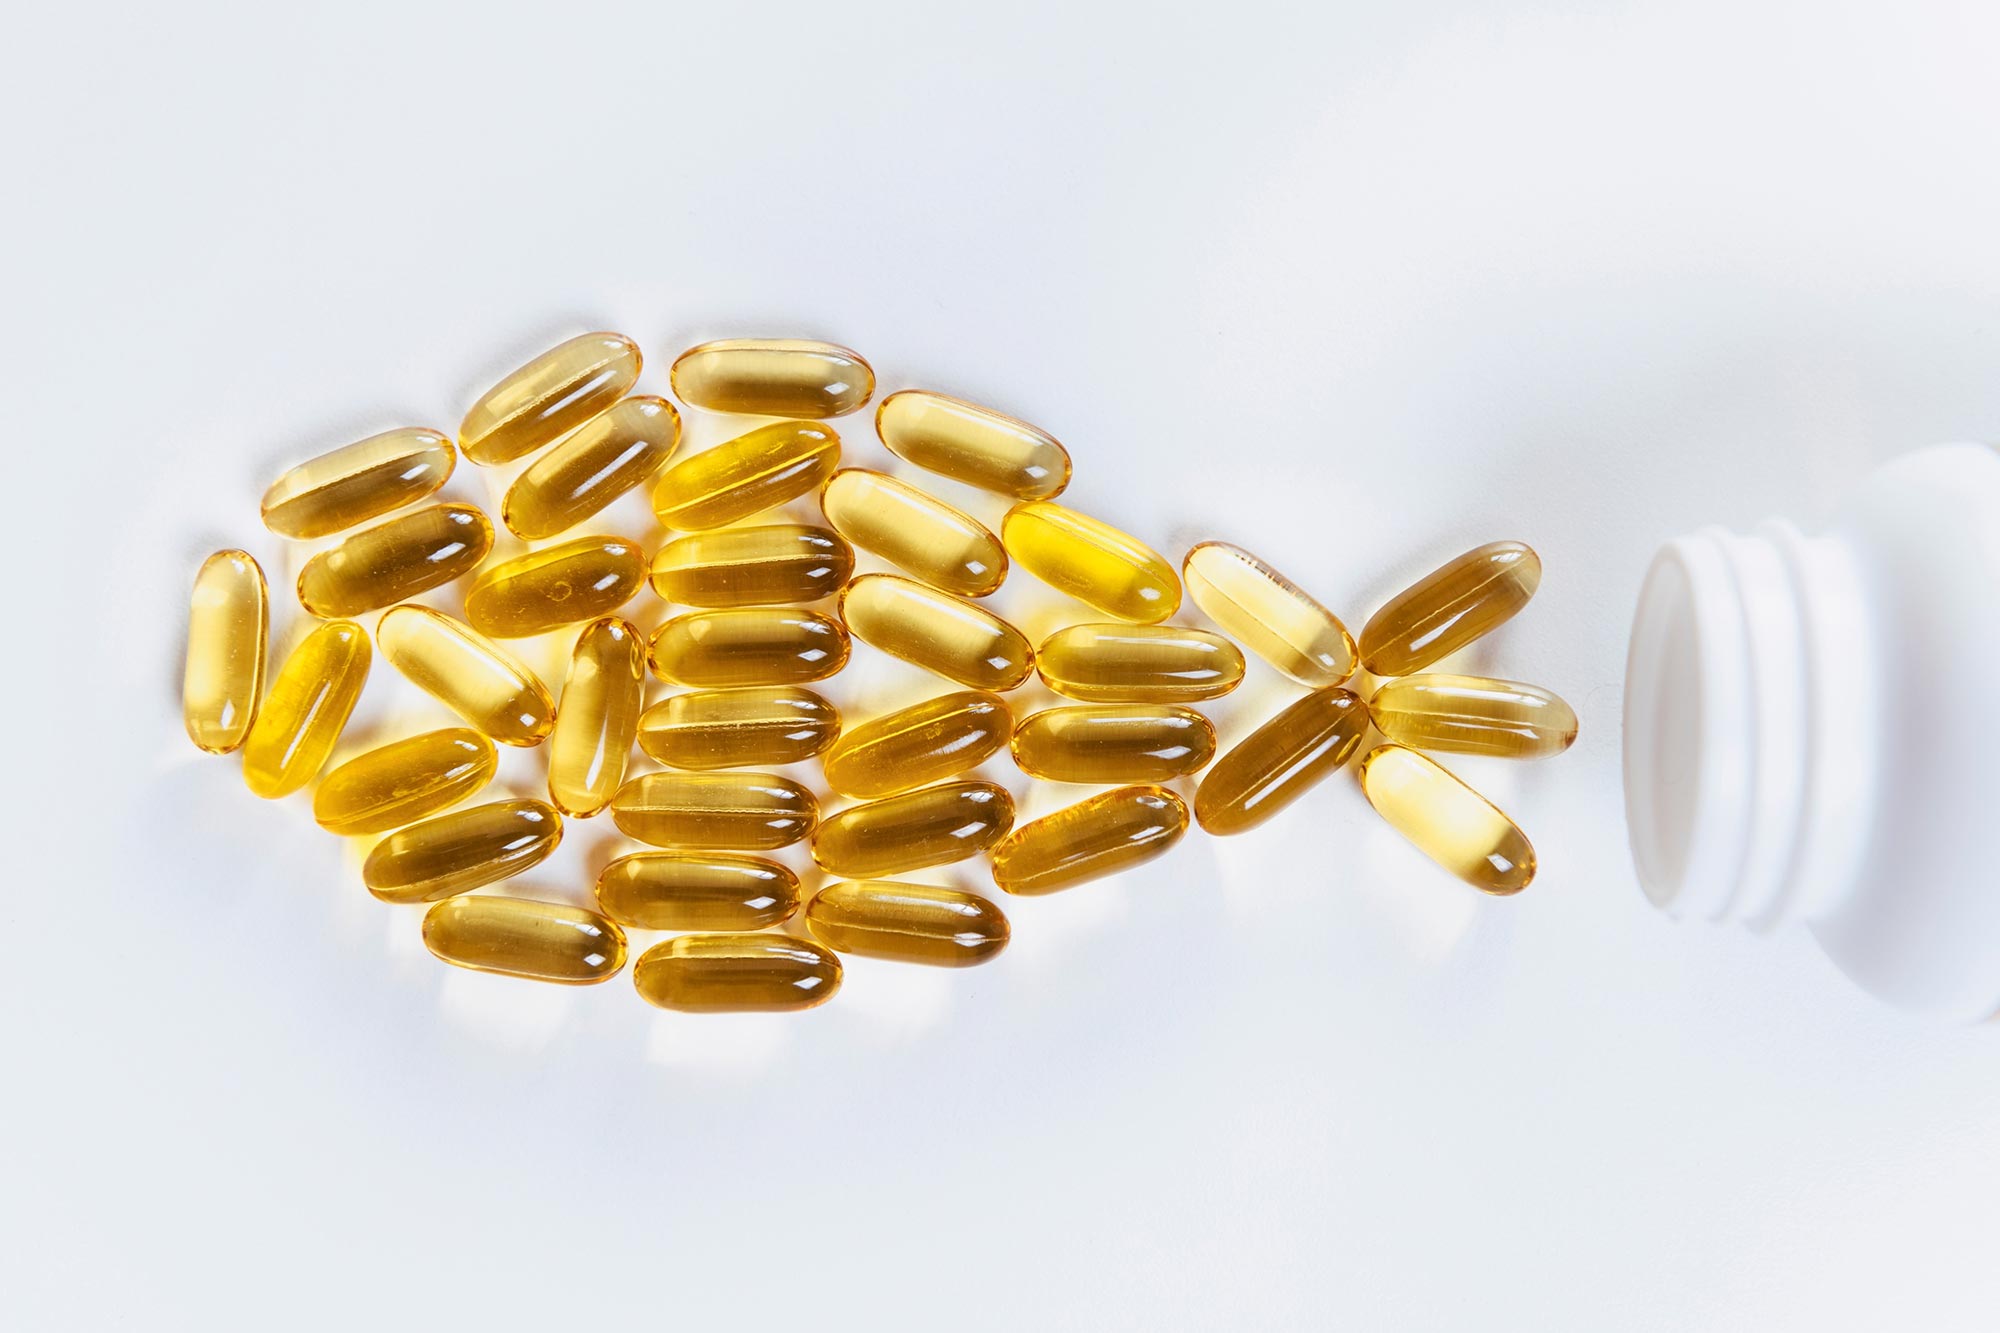 omega-3-linked-to-improved-brain-structure-and-cognition-at-midlife